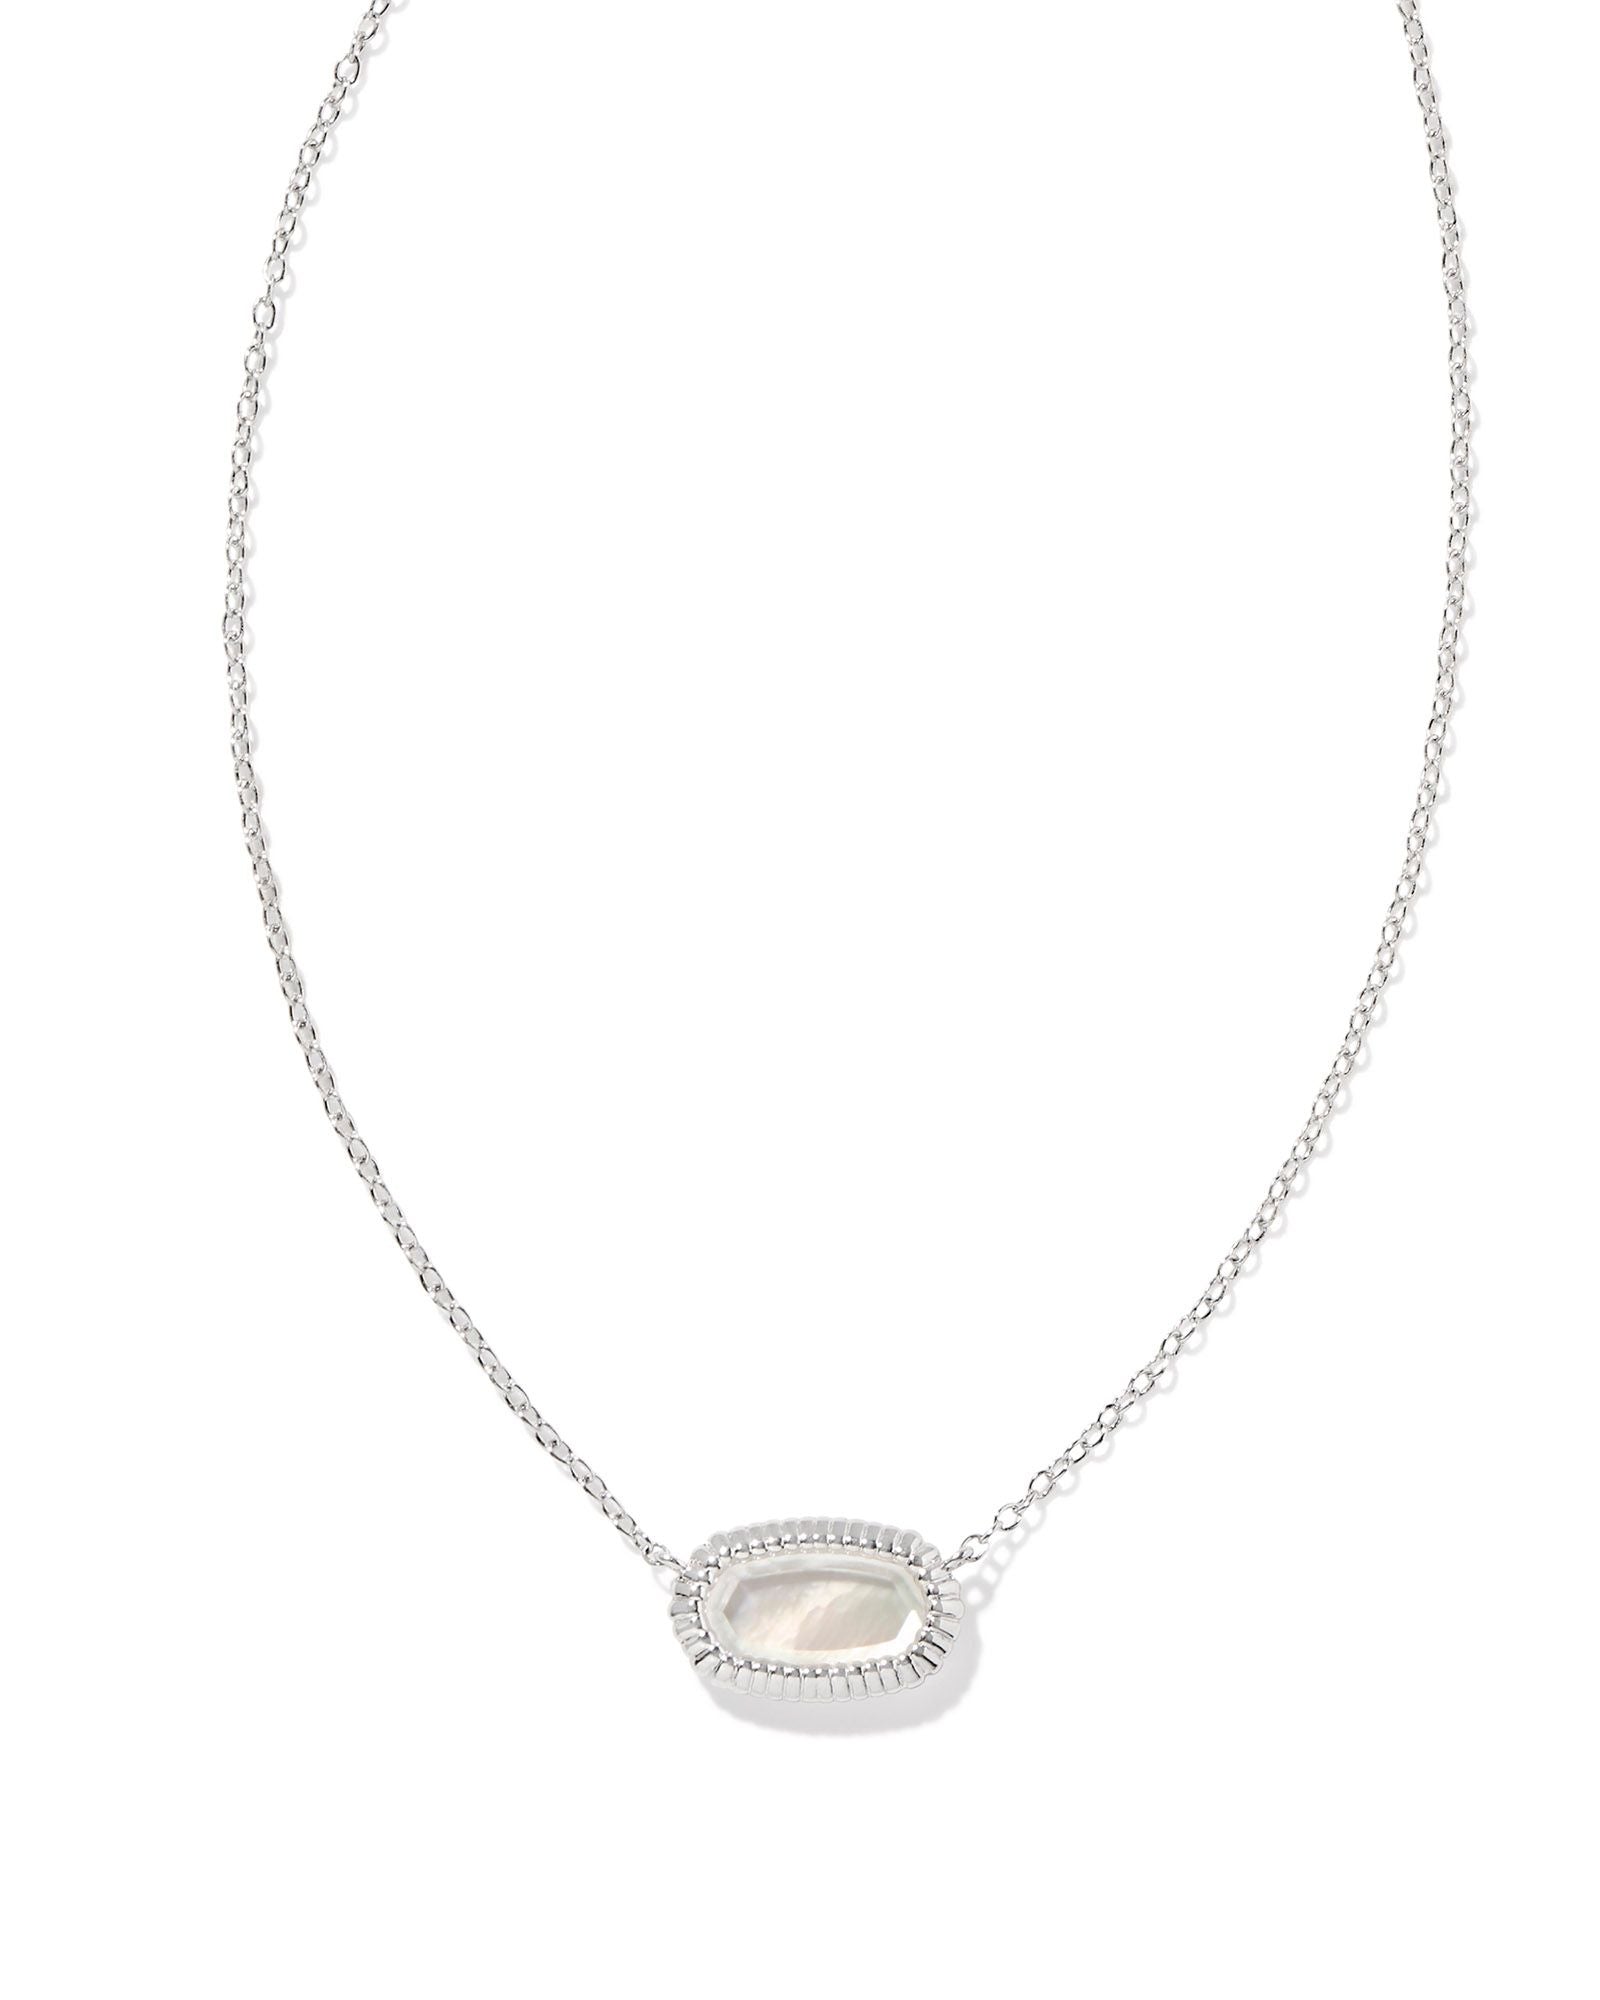 Elisa Ridge Framed Pendant Necklace in Rhodium Ivory Mother of Pearl